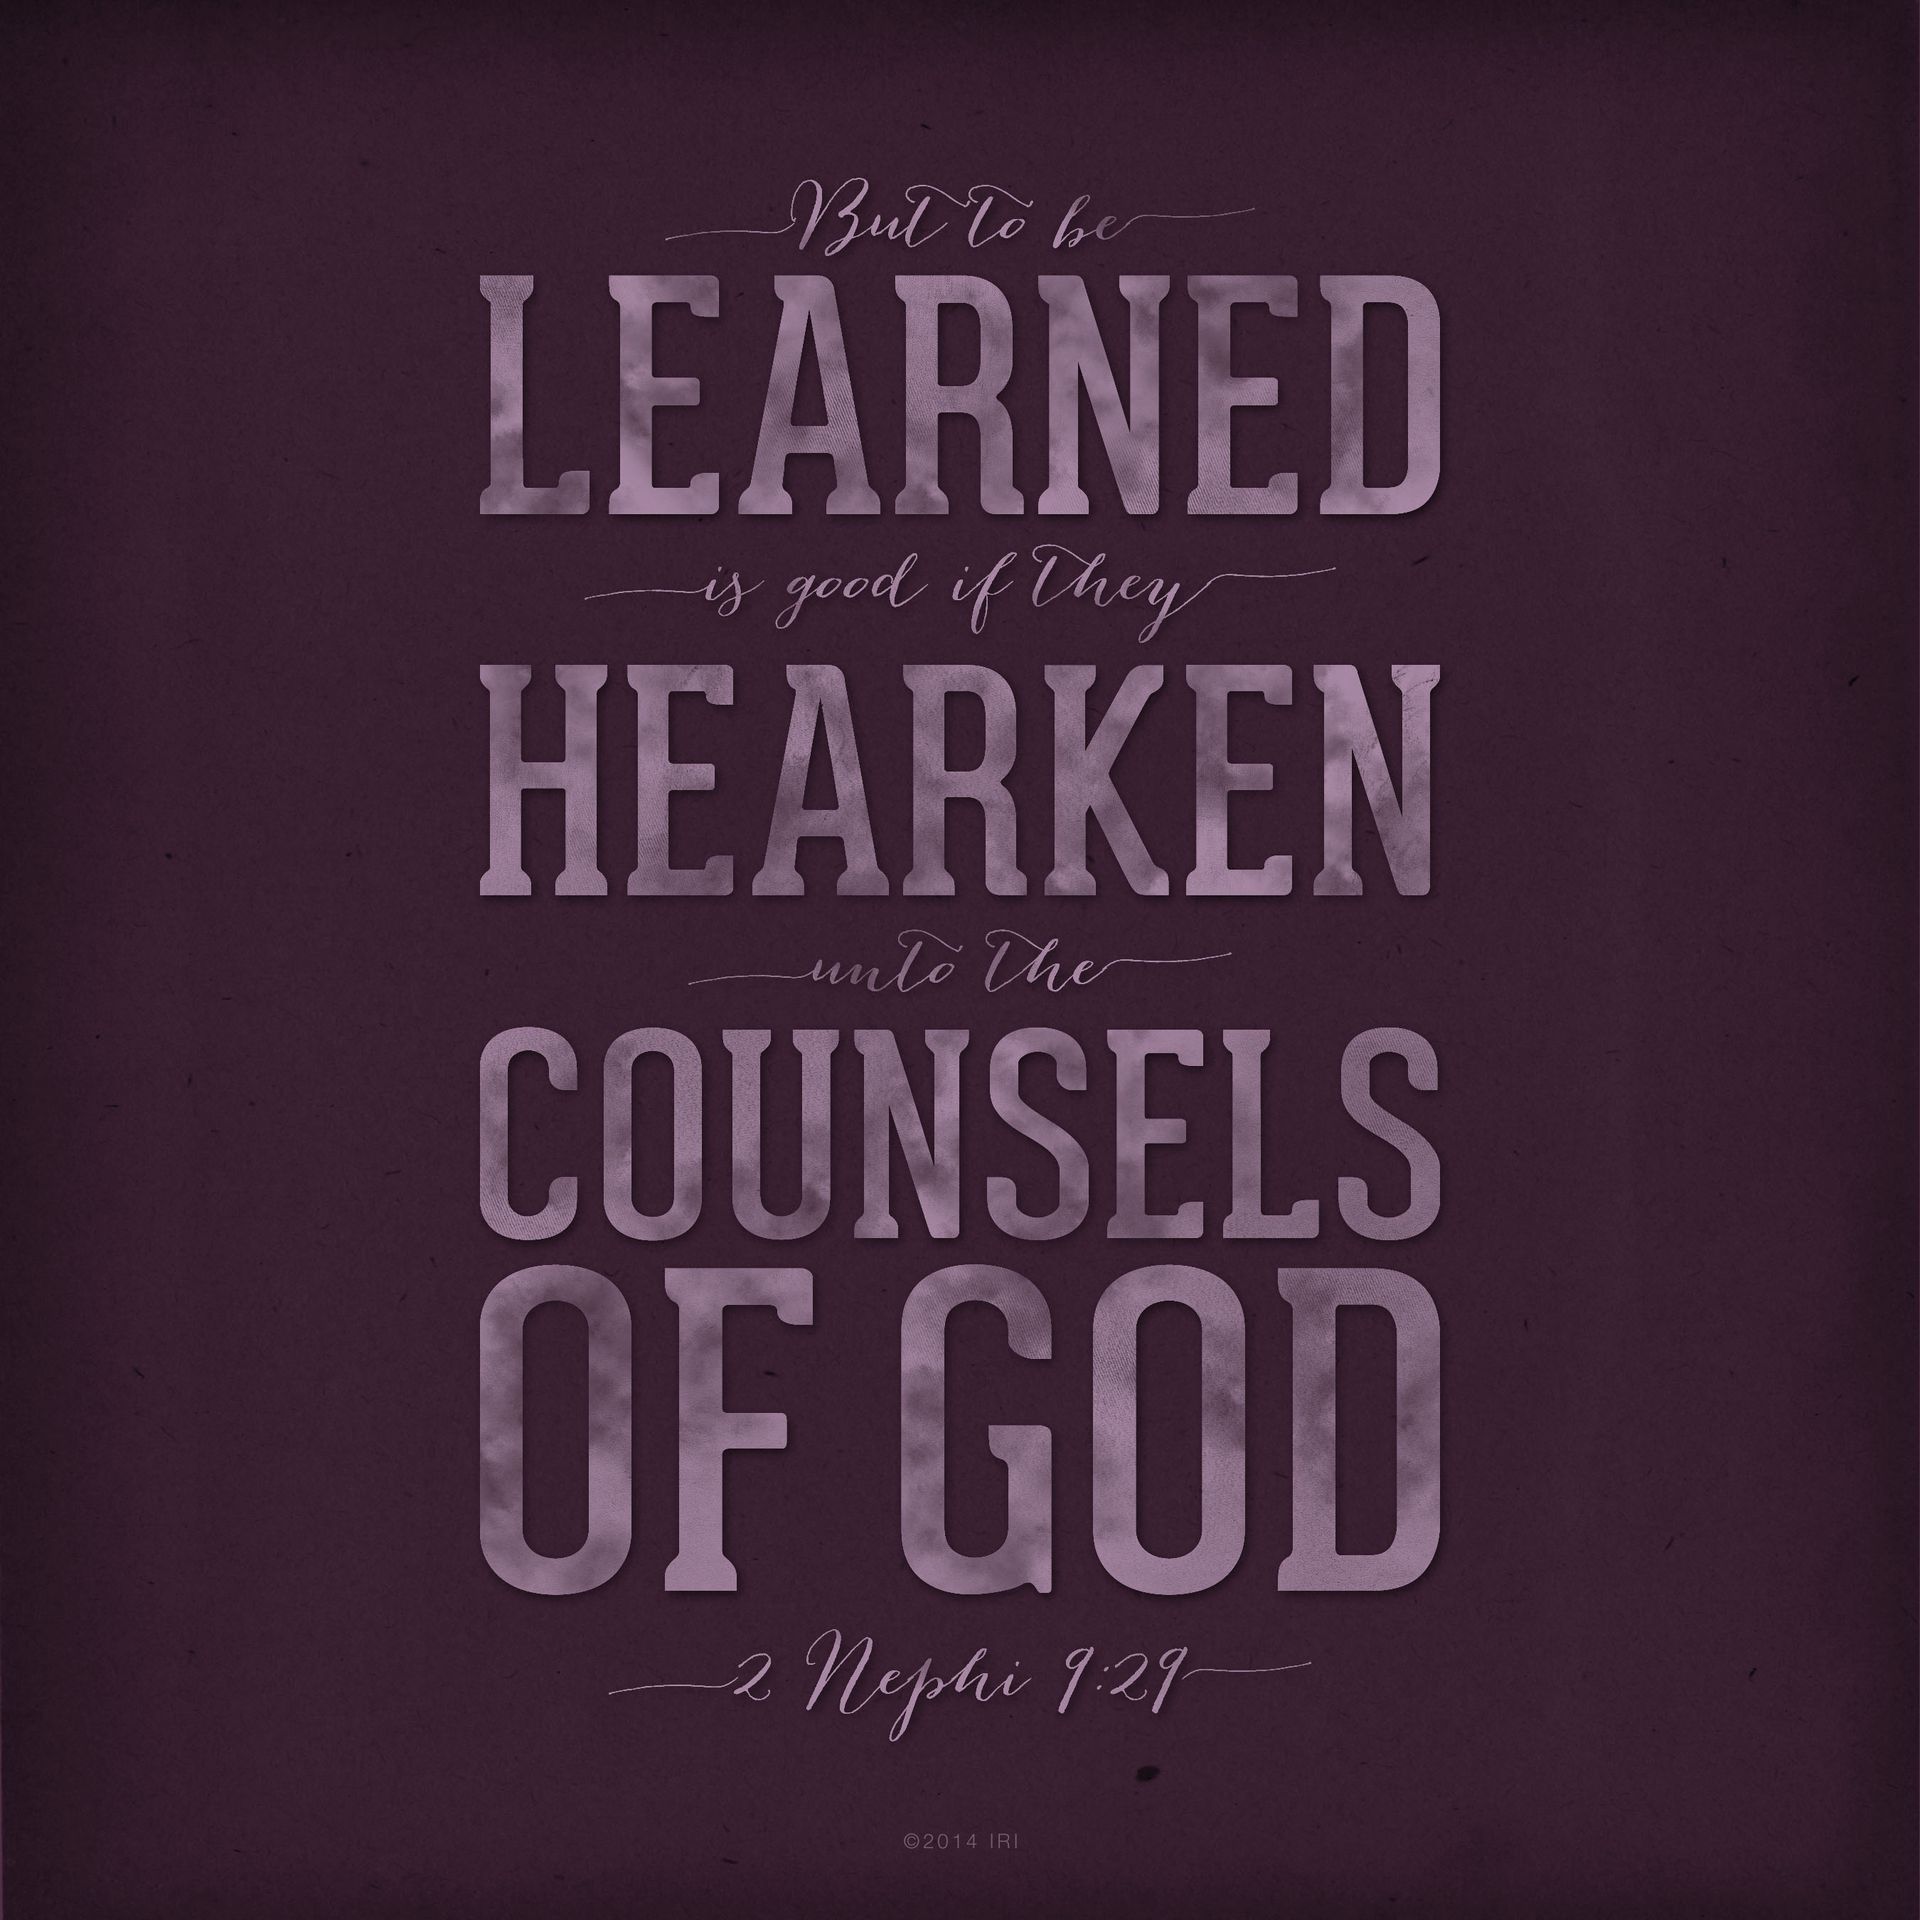 “But to be learned is good if they hearken unto the counsels of God.”—2 Nephi 9:29